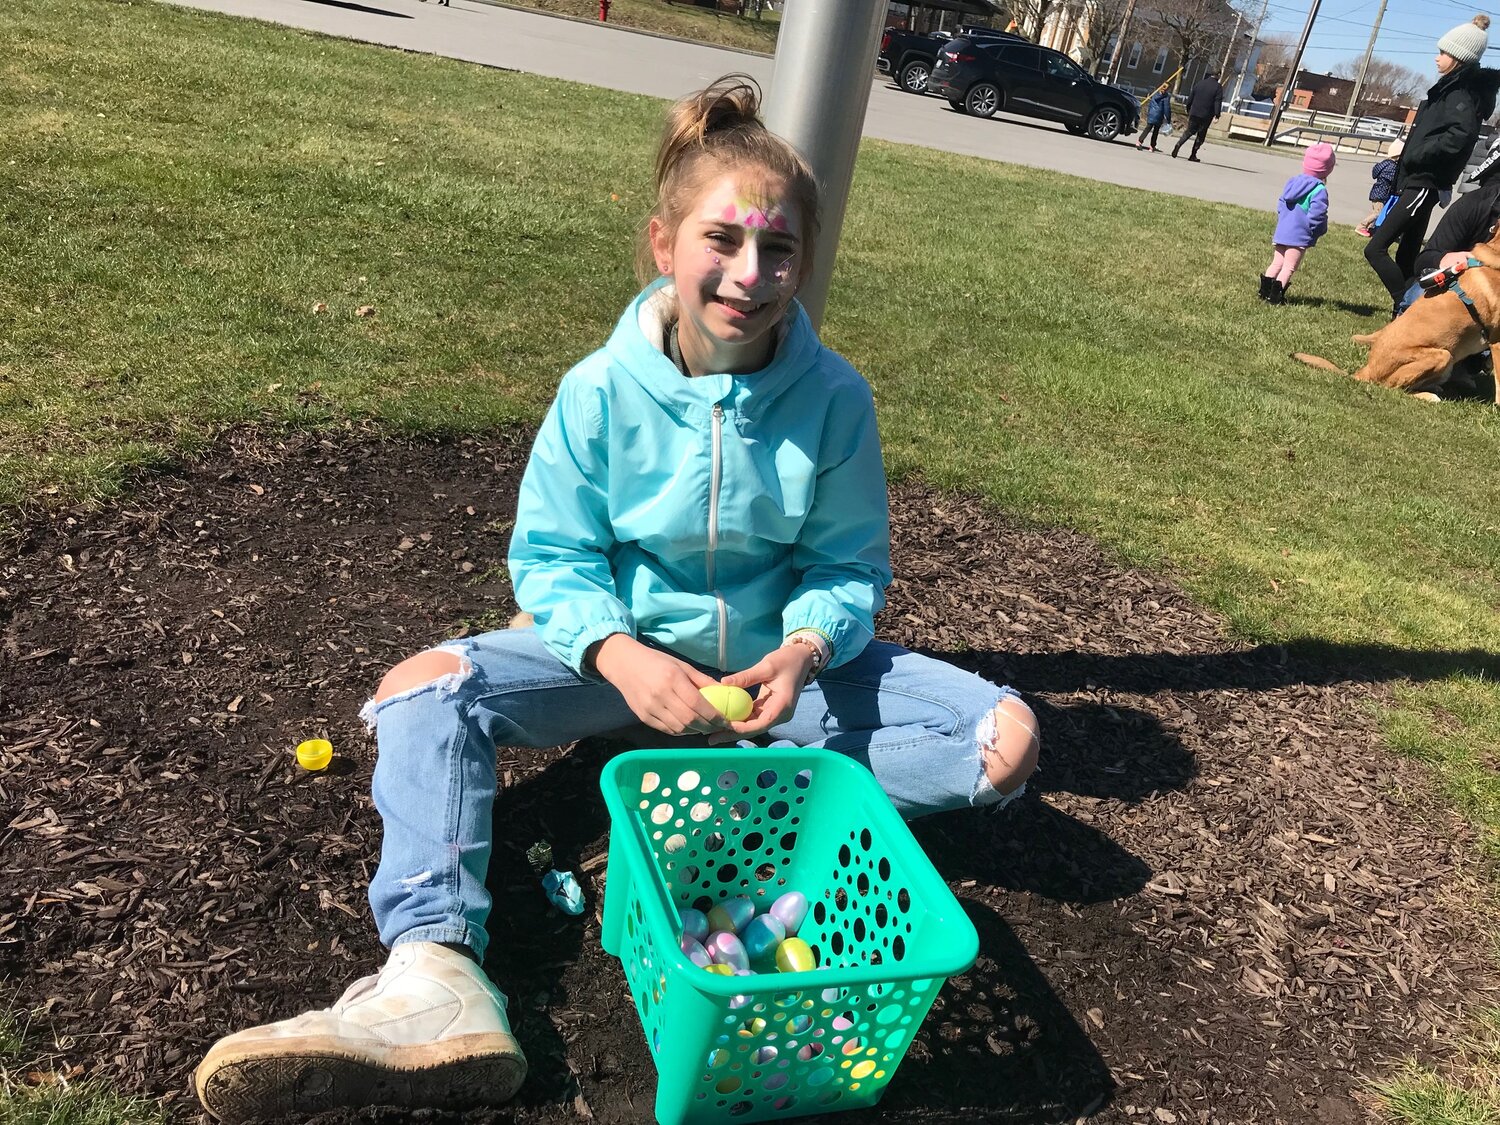 A facepainted Arianna Naegele checks her plastic eggs for the candy inside them Saturday, April 8 after the Easter Egg Hunt in Sherrill.